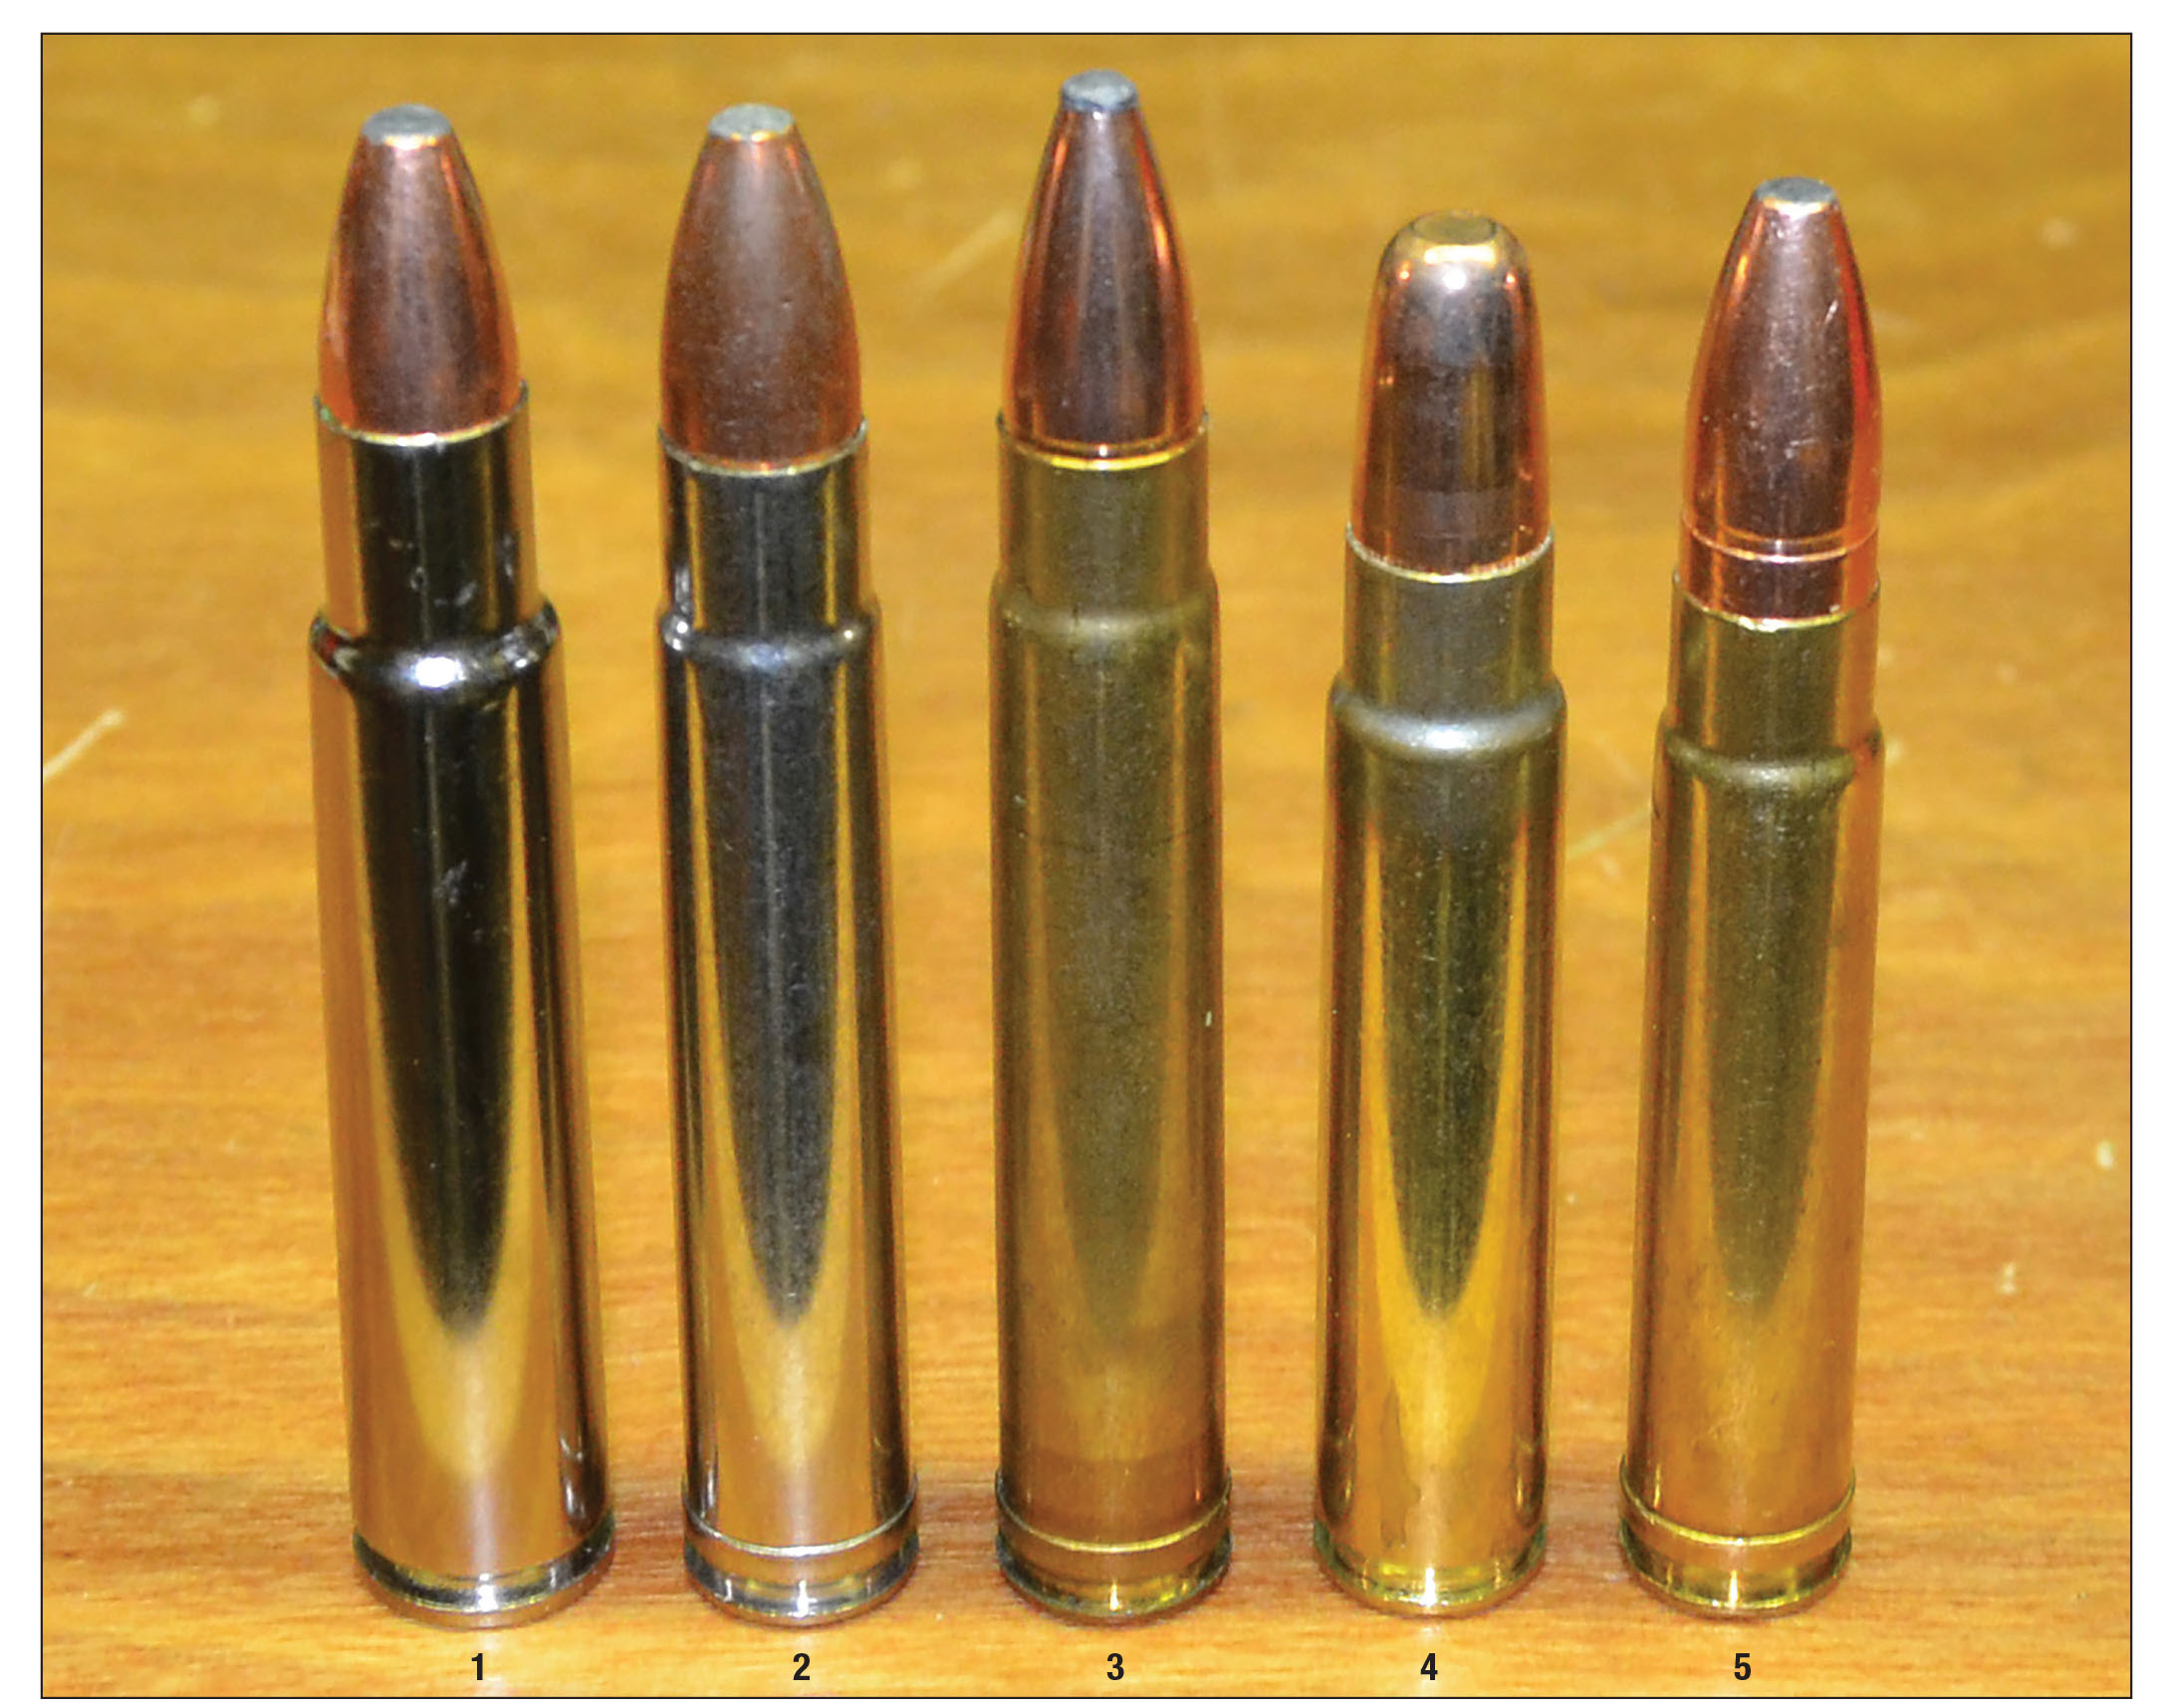 The .416 Rigby operates at lower chamber pressures than smaller cartridges of its caliber and that can be a good thing when hunting under an African sun with temperatures exceeding 100 degrees Fahrenheit. This cartridge lineup includes: (1) . 416 Rigby, (2) .416 Remington Magnum, (3) .416 Hoffman, (4) .416 Ruger and (5) .416 Taylor.